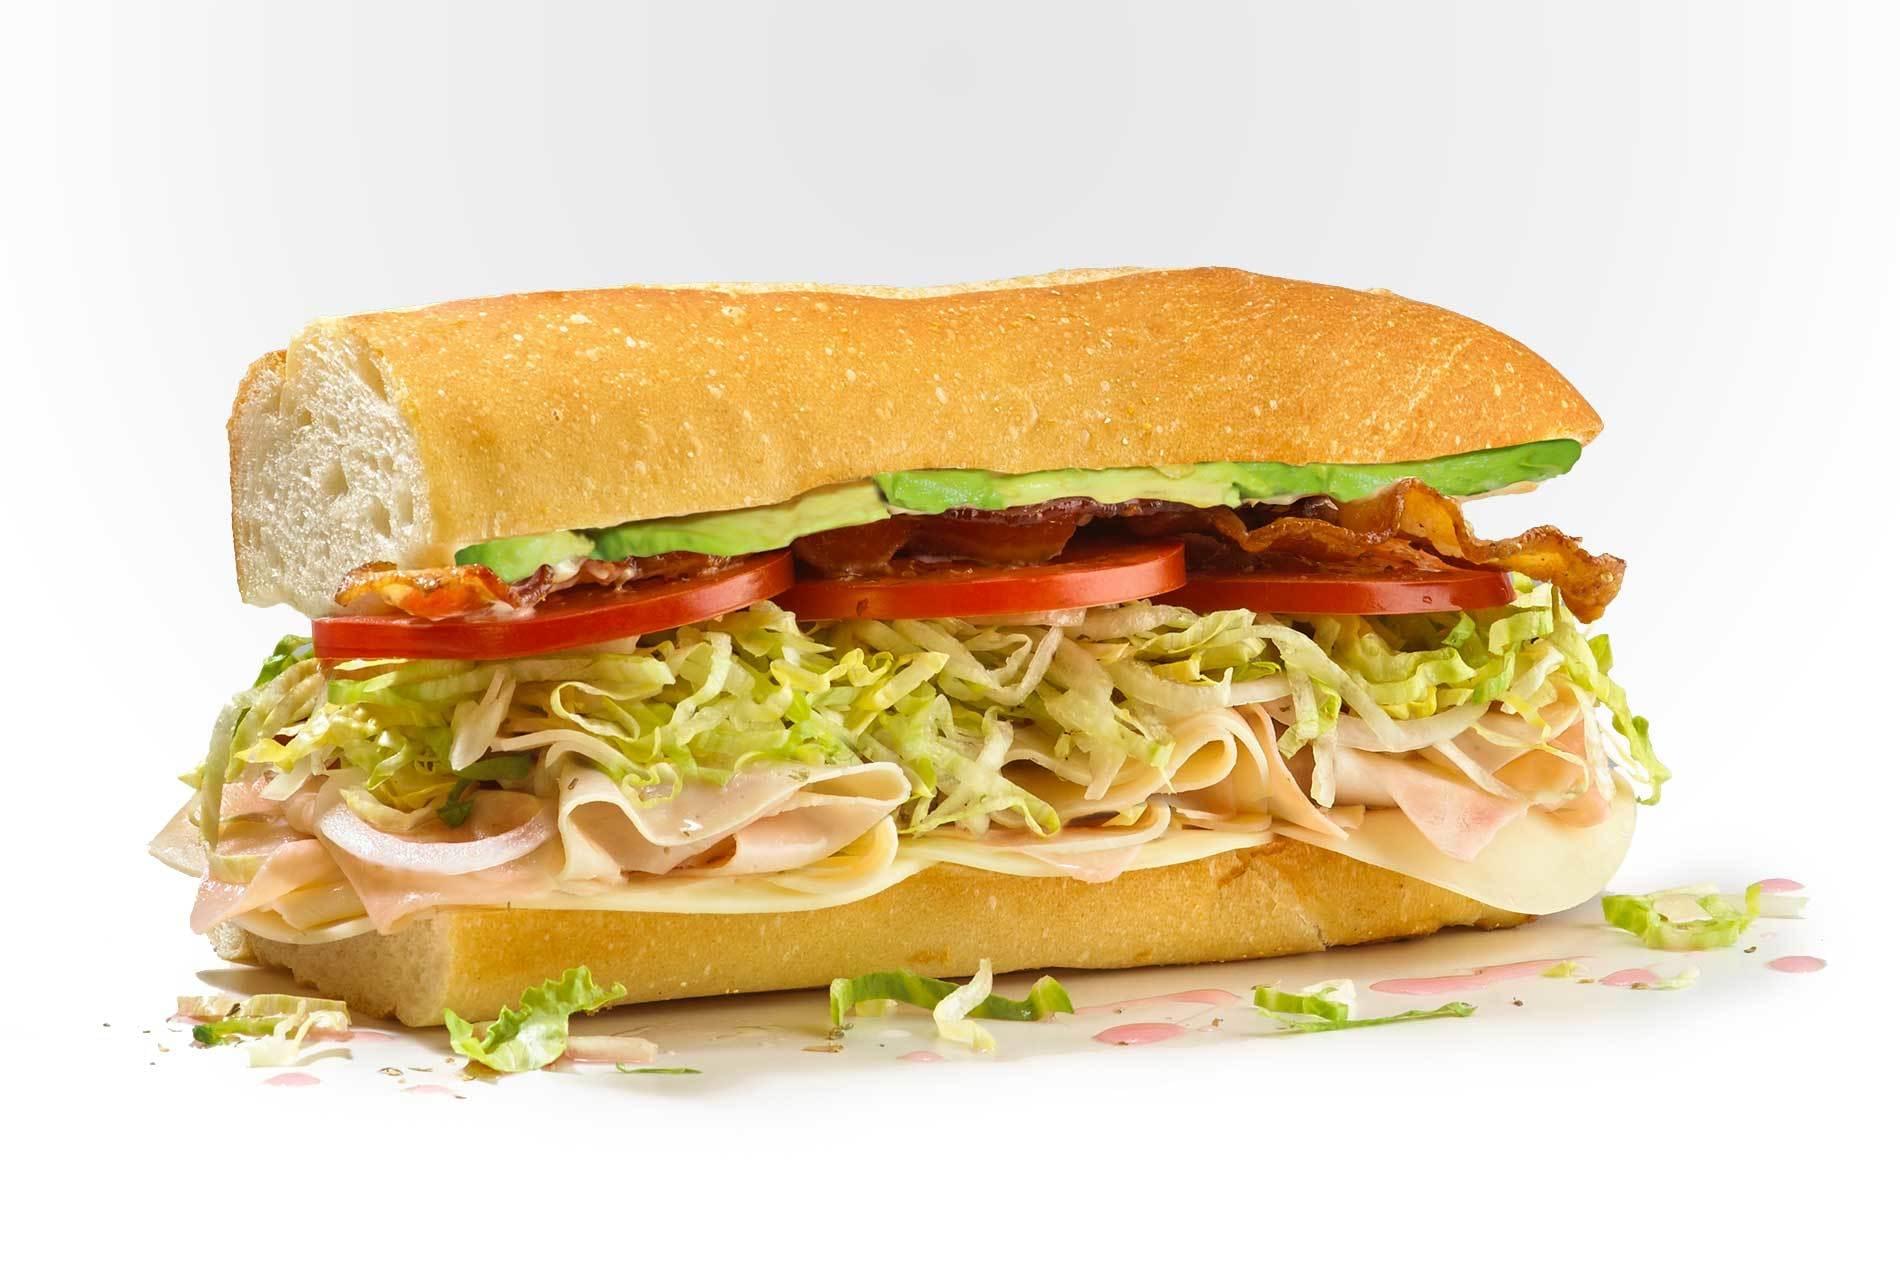 Jersey Mike's Giant California Club Sub Nutrition Facts